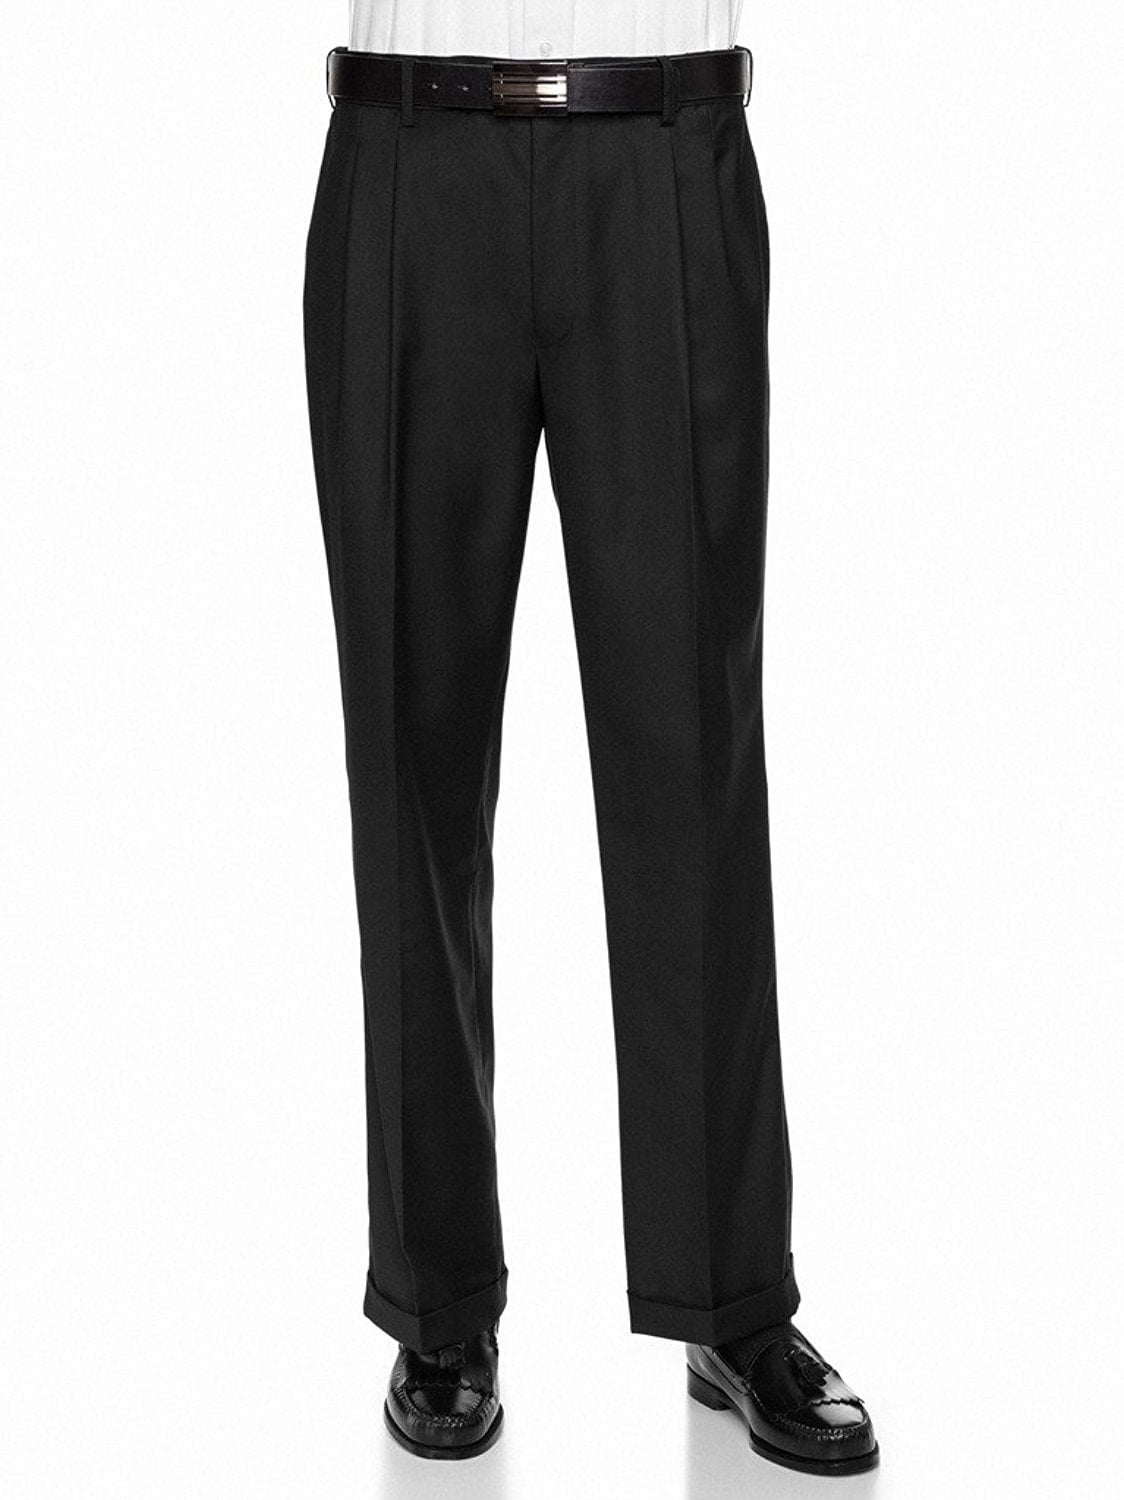 Giovanni Uomo Mens Pleated Front Expandable Waist Dress Pants